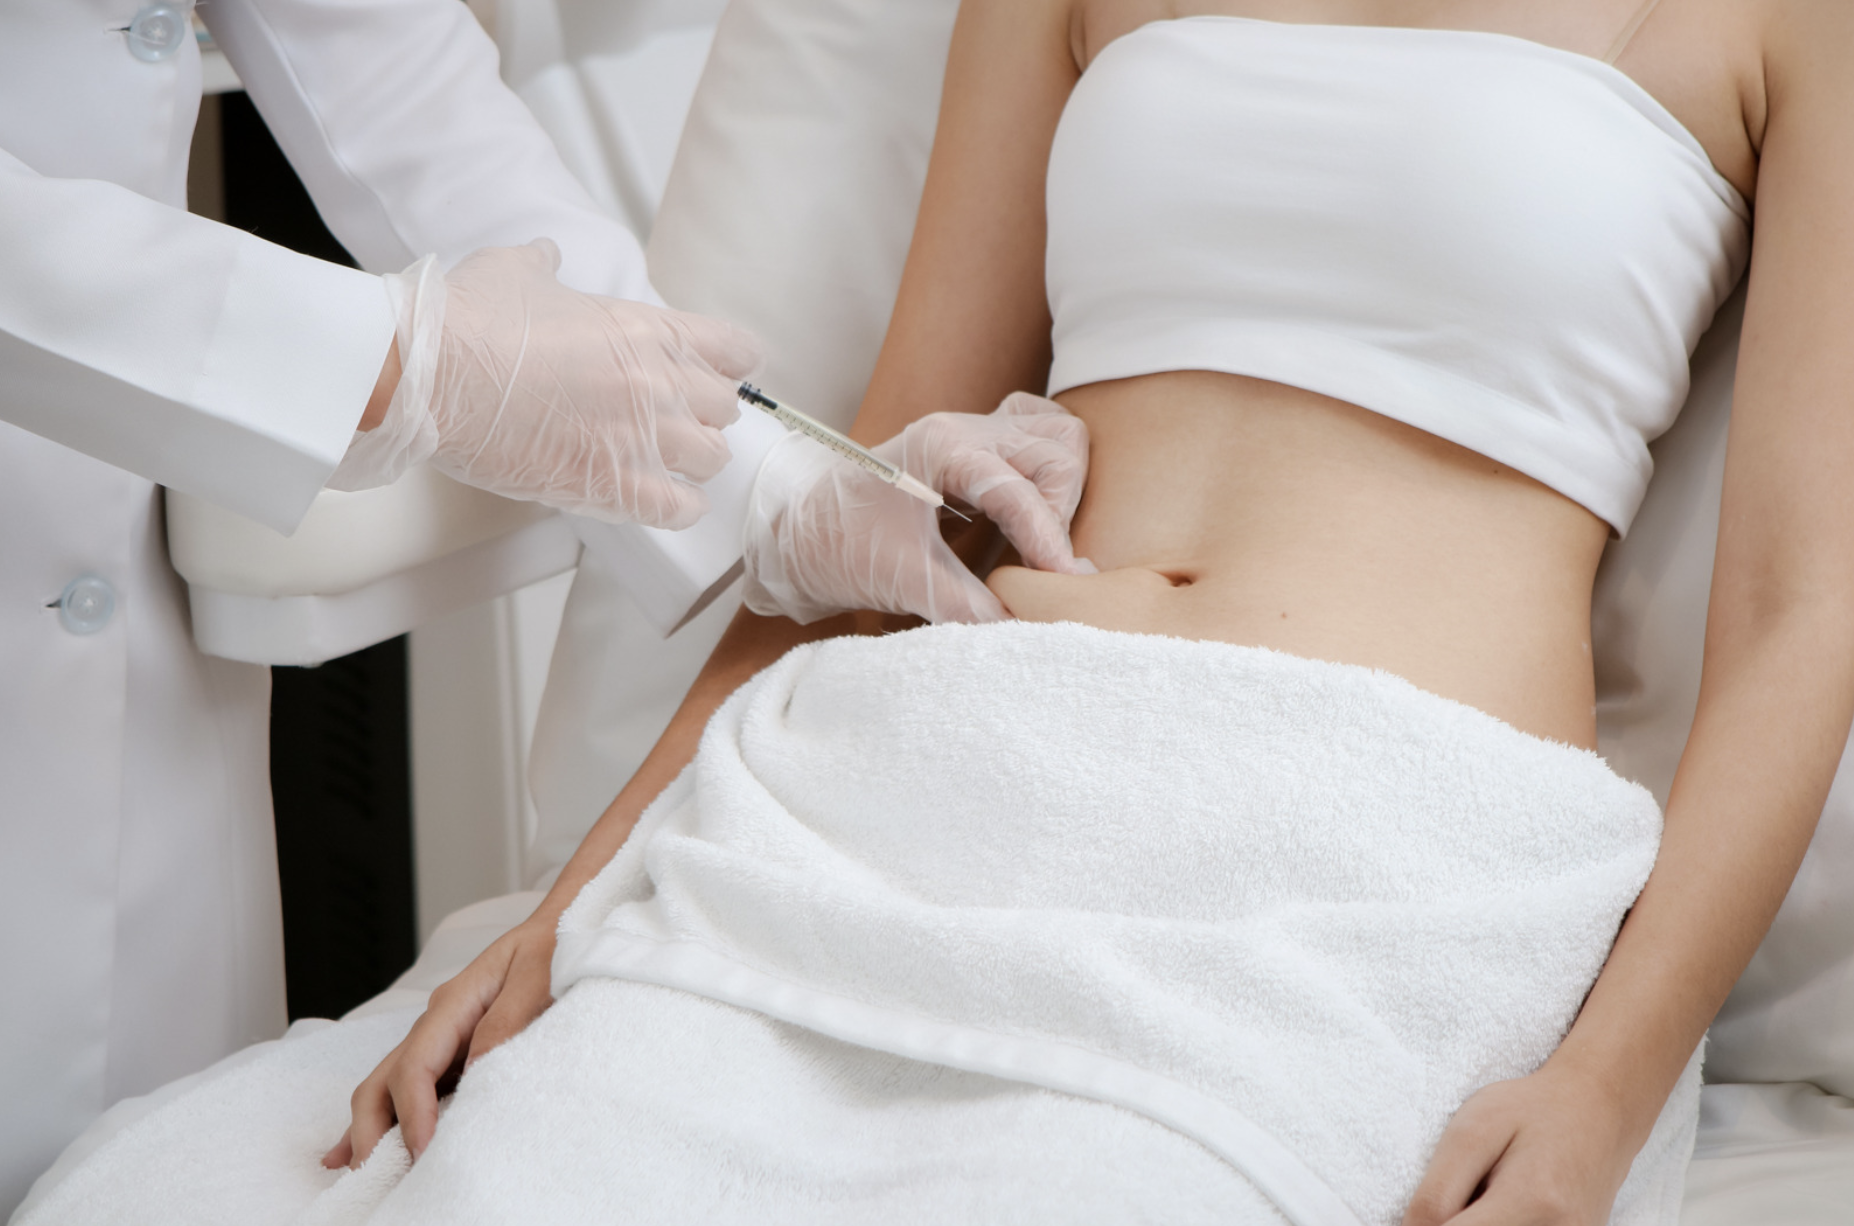 Fat dissolving injections: How do they work? Are they safe? And where can they be used?